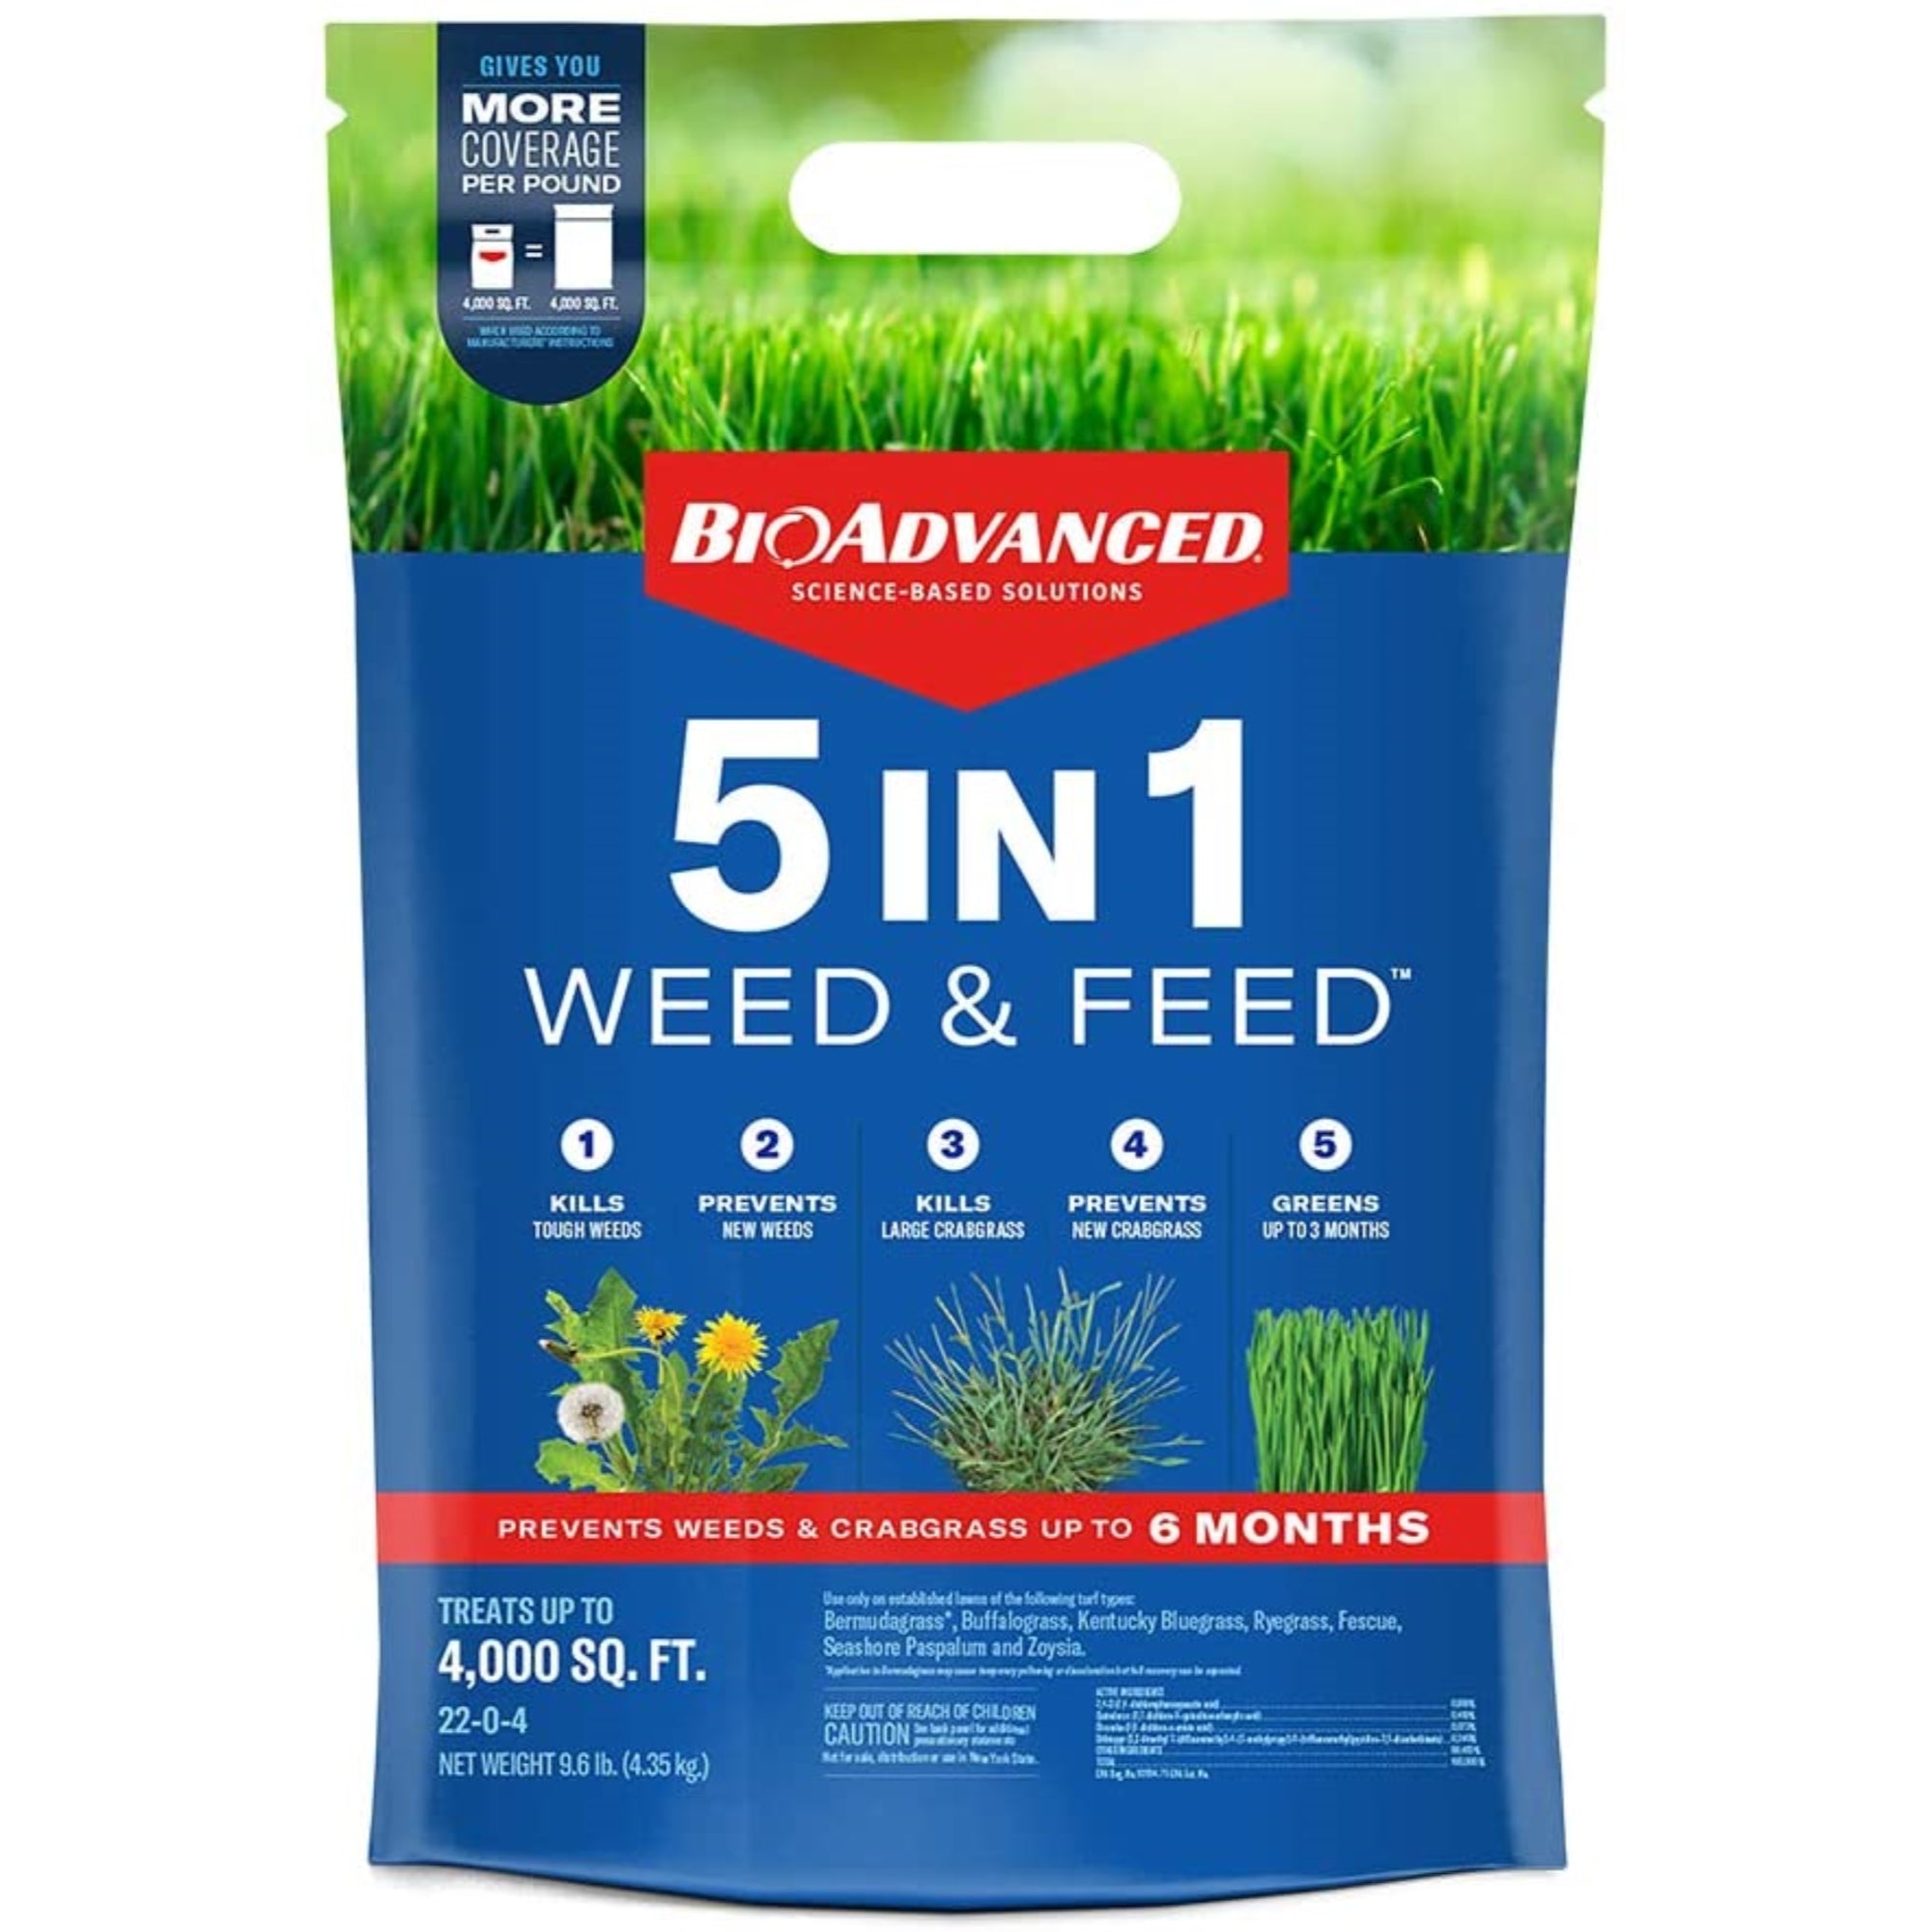 BioAdvanced 5-in-1 Weed & Feed Lawn Fertilizer and Weed Control, 9.6 lb